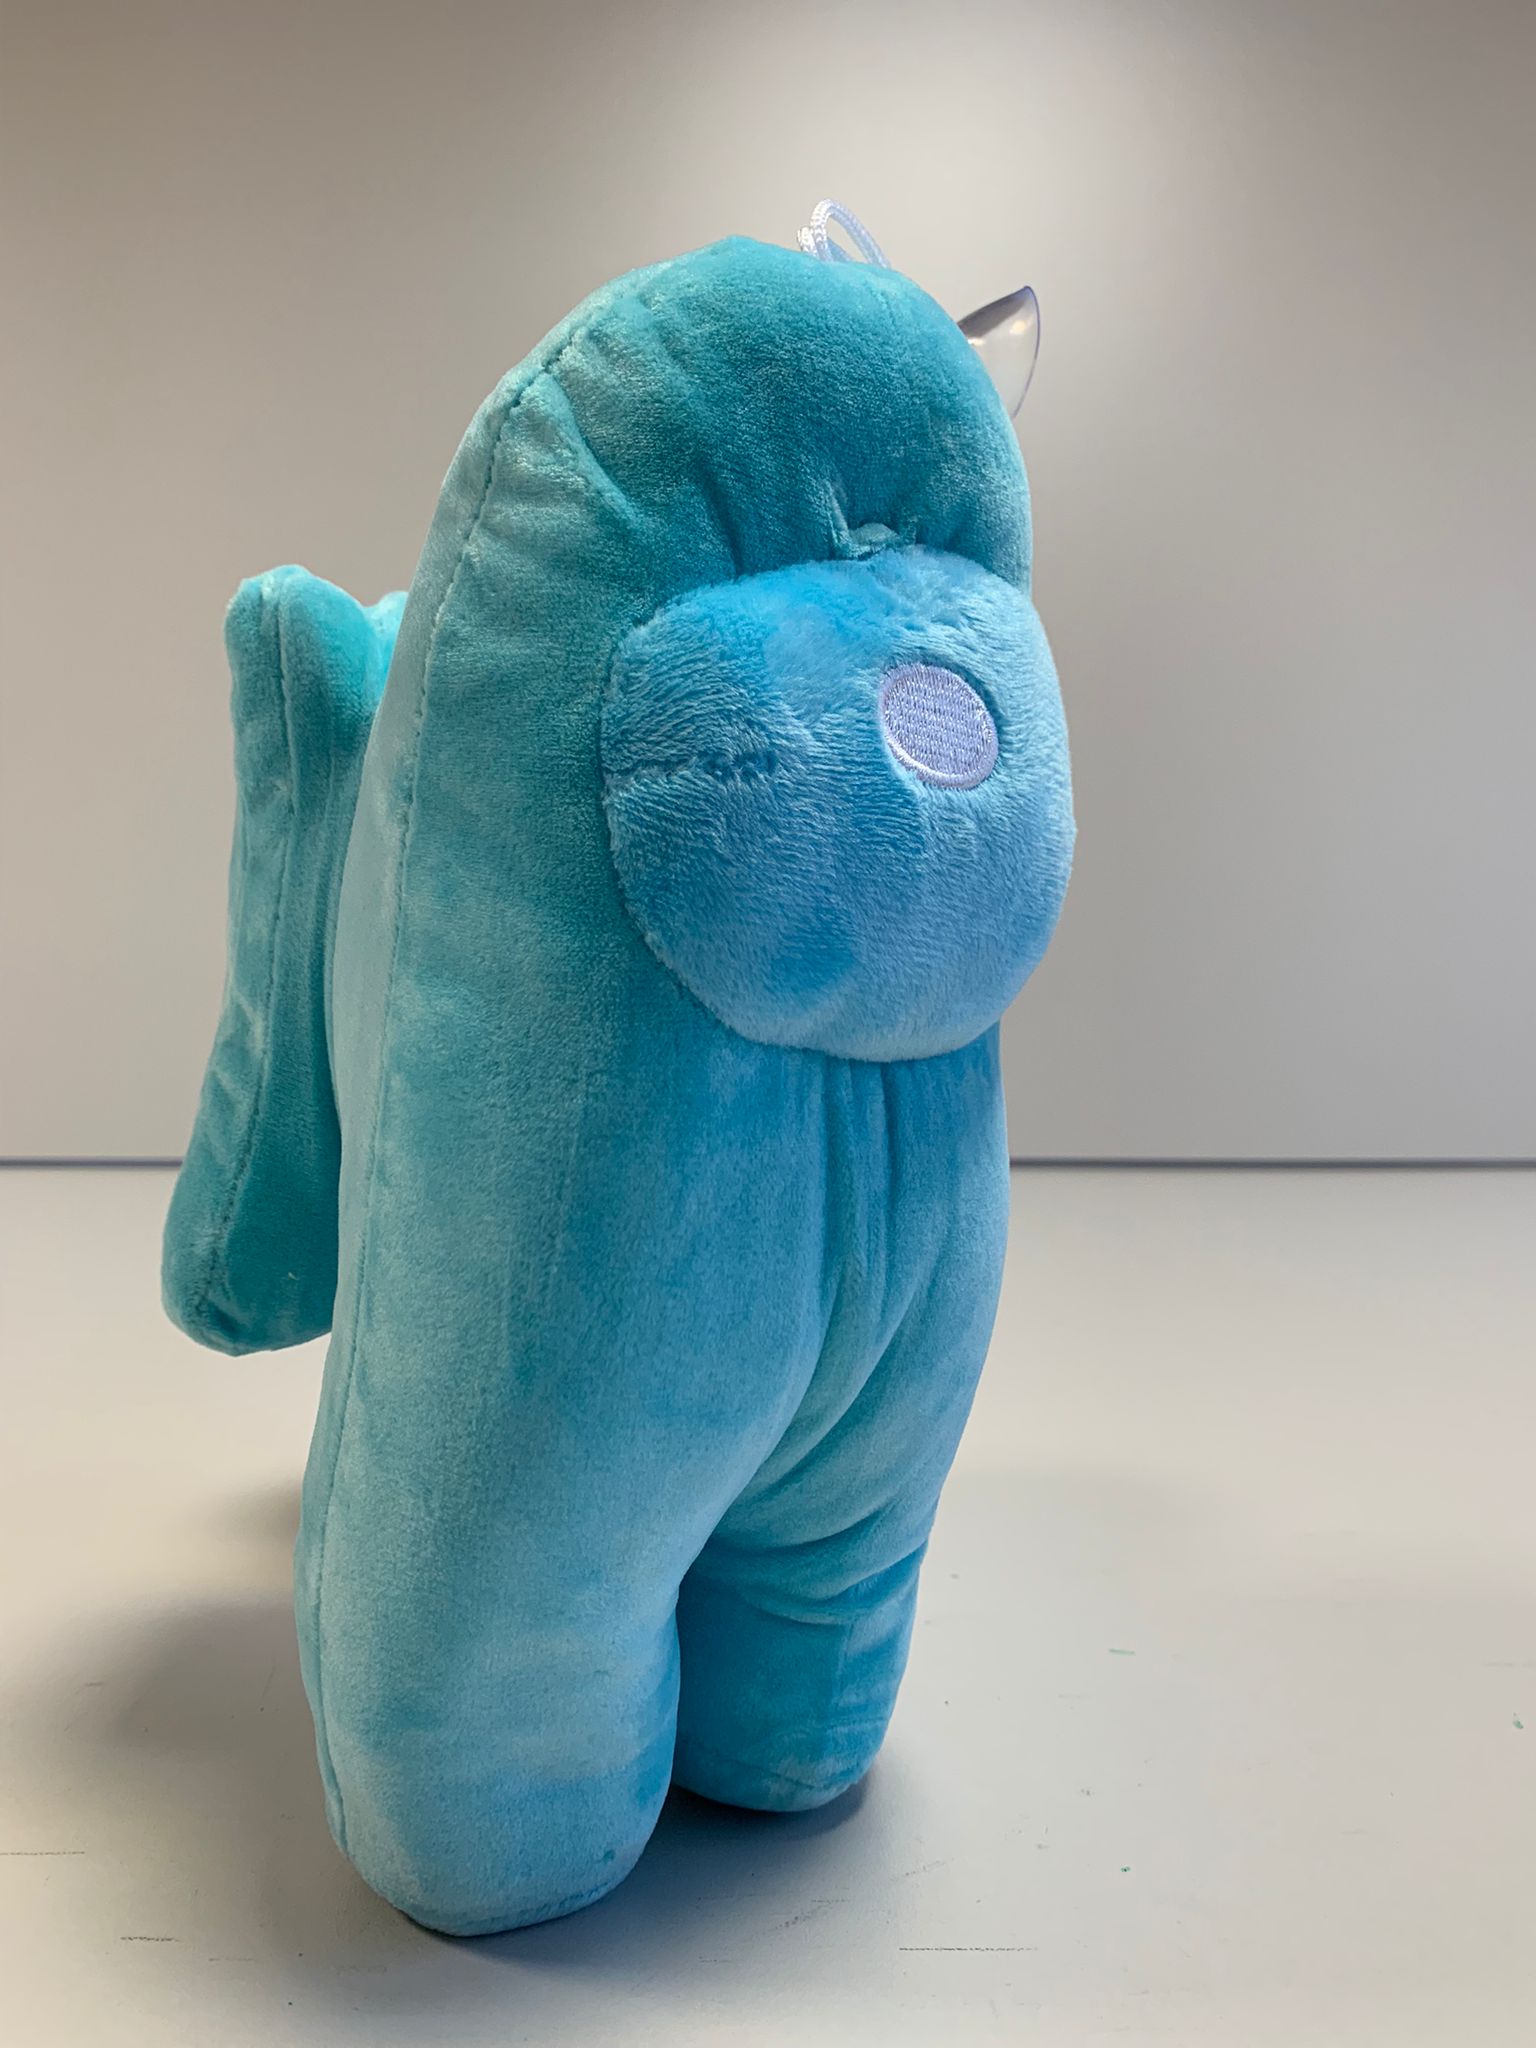 Plush character from the game Among Us, small, light blue